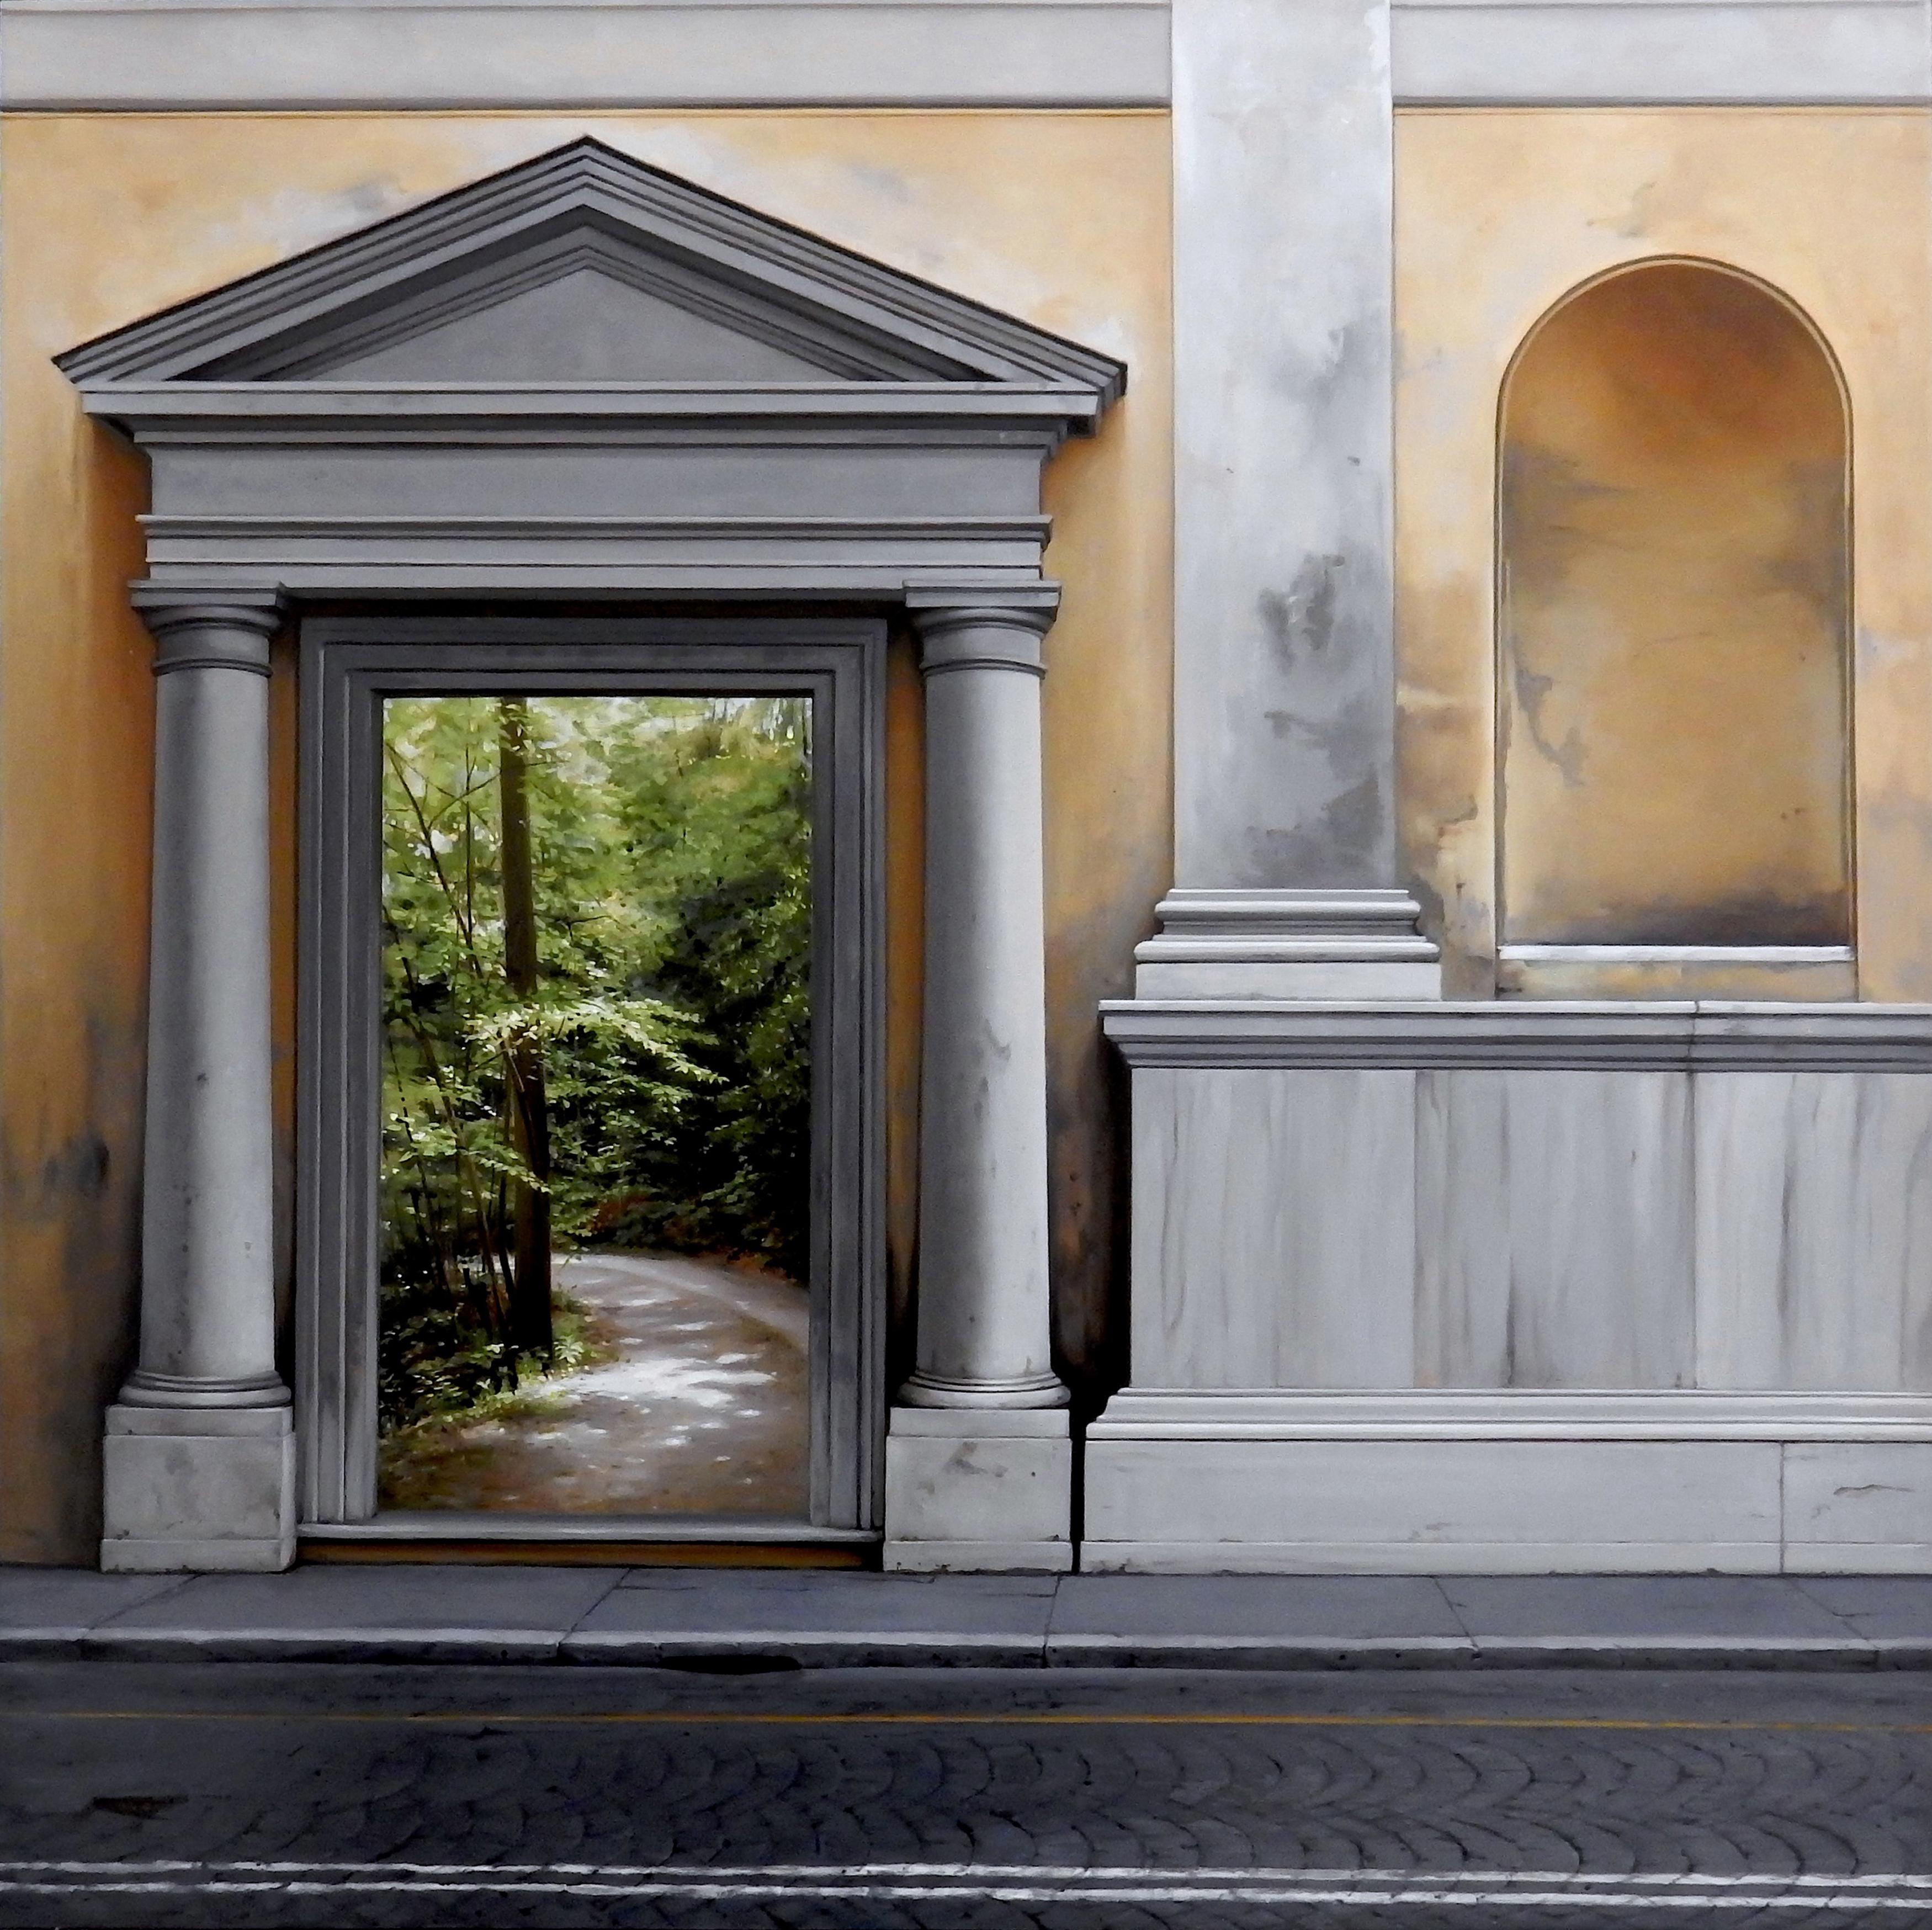 Carol Pylant Landscape Painting - No Return - Architectural Facade with Lush Green Gardens, Oil Painting